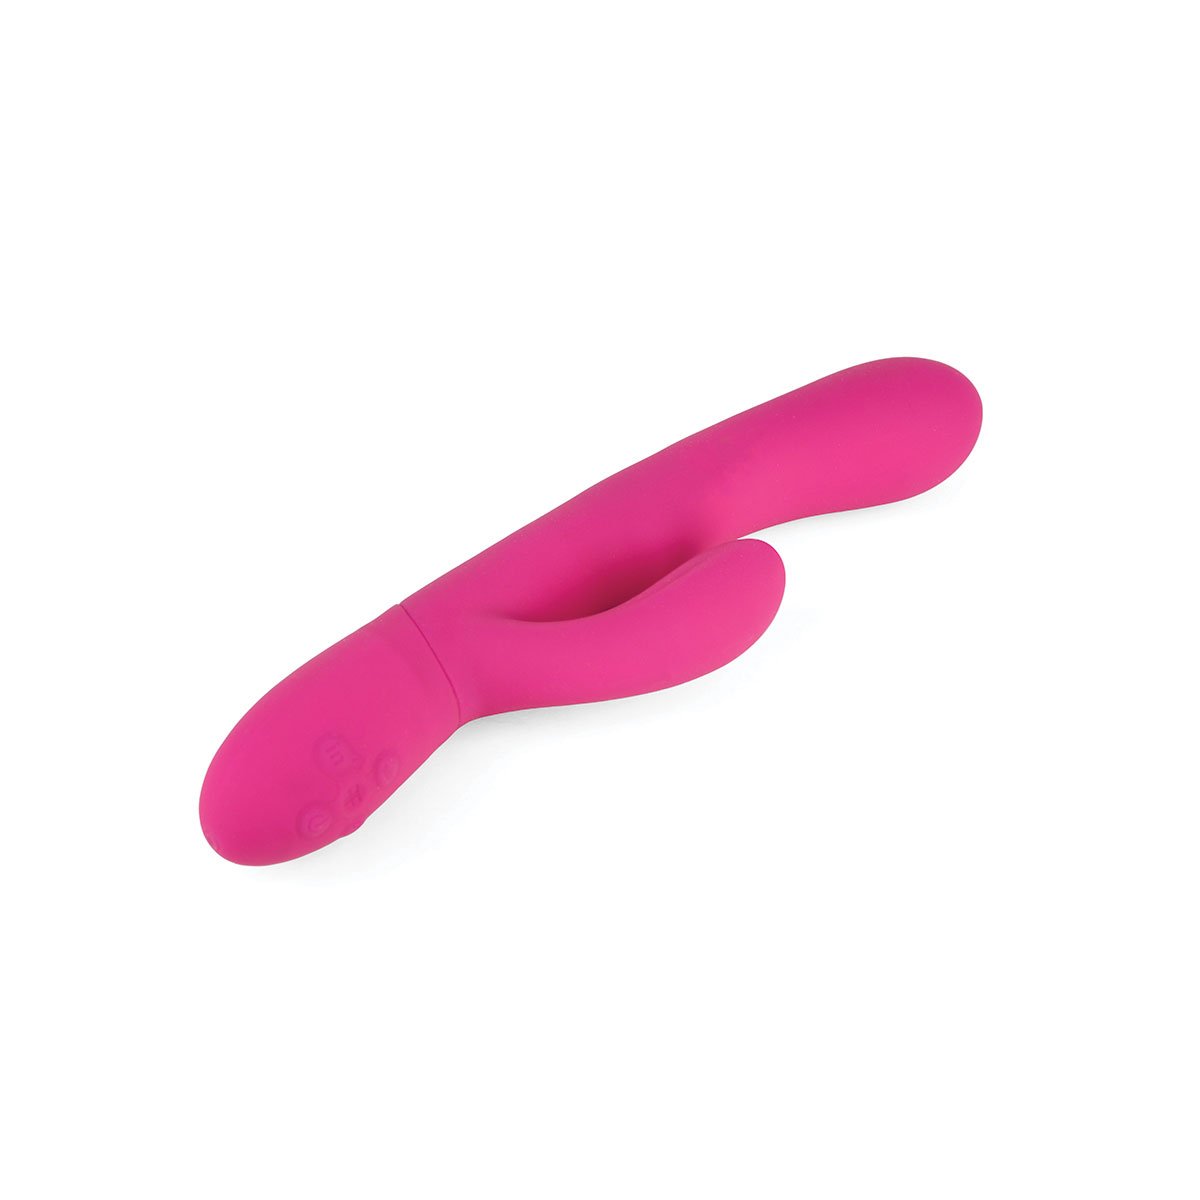 Femme Funn Ultra Rabbit - Buy At Luxury Toy X - Free 3-Day Shipping